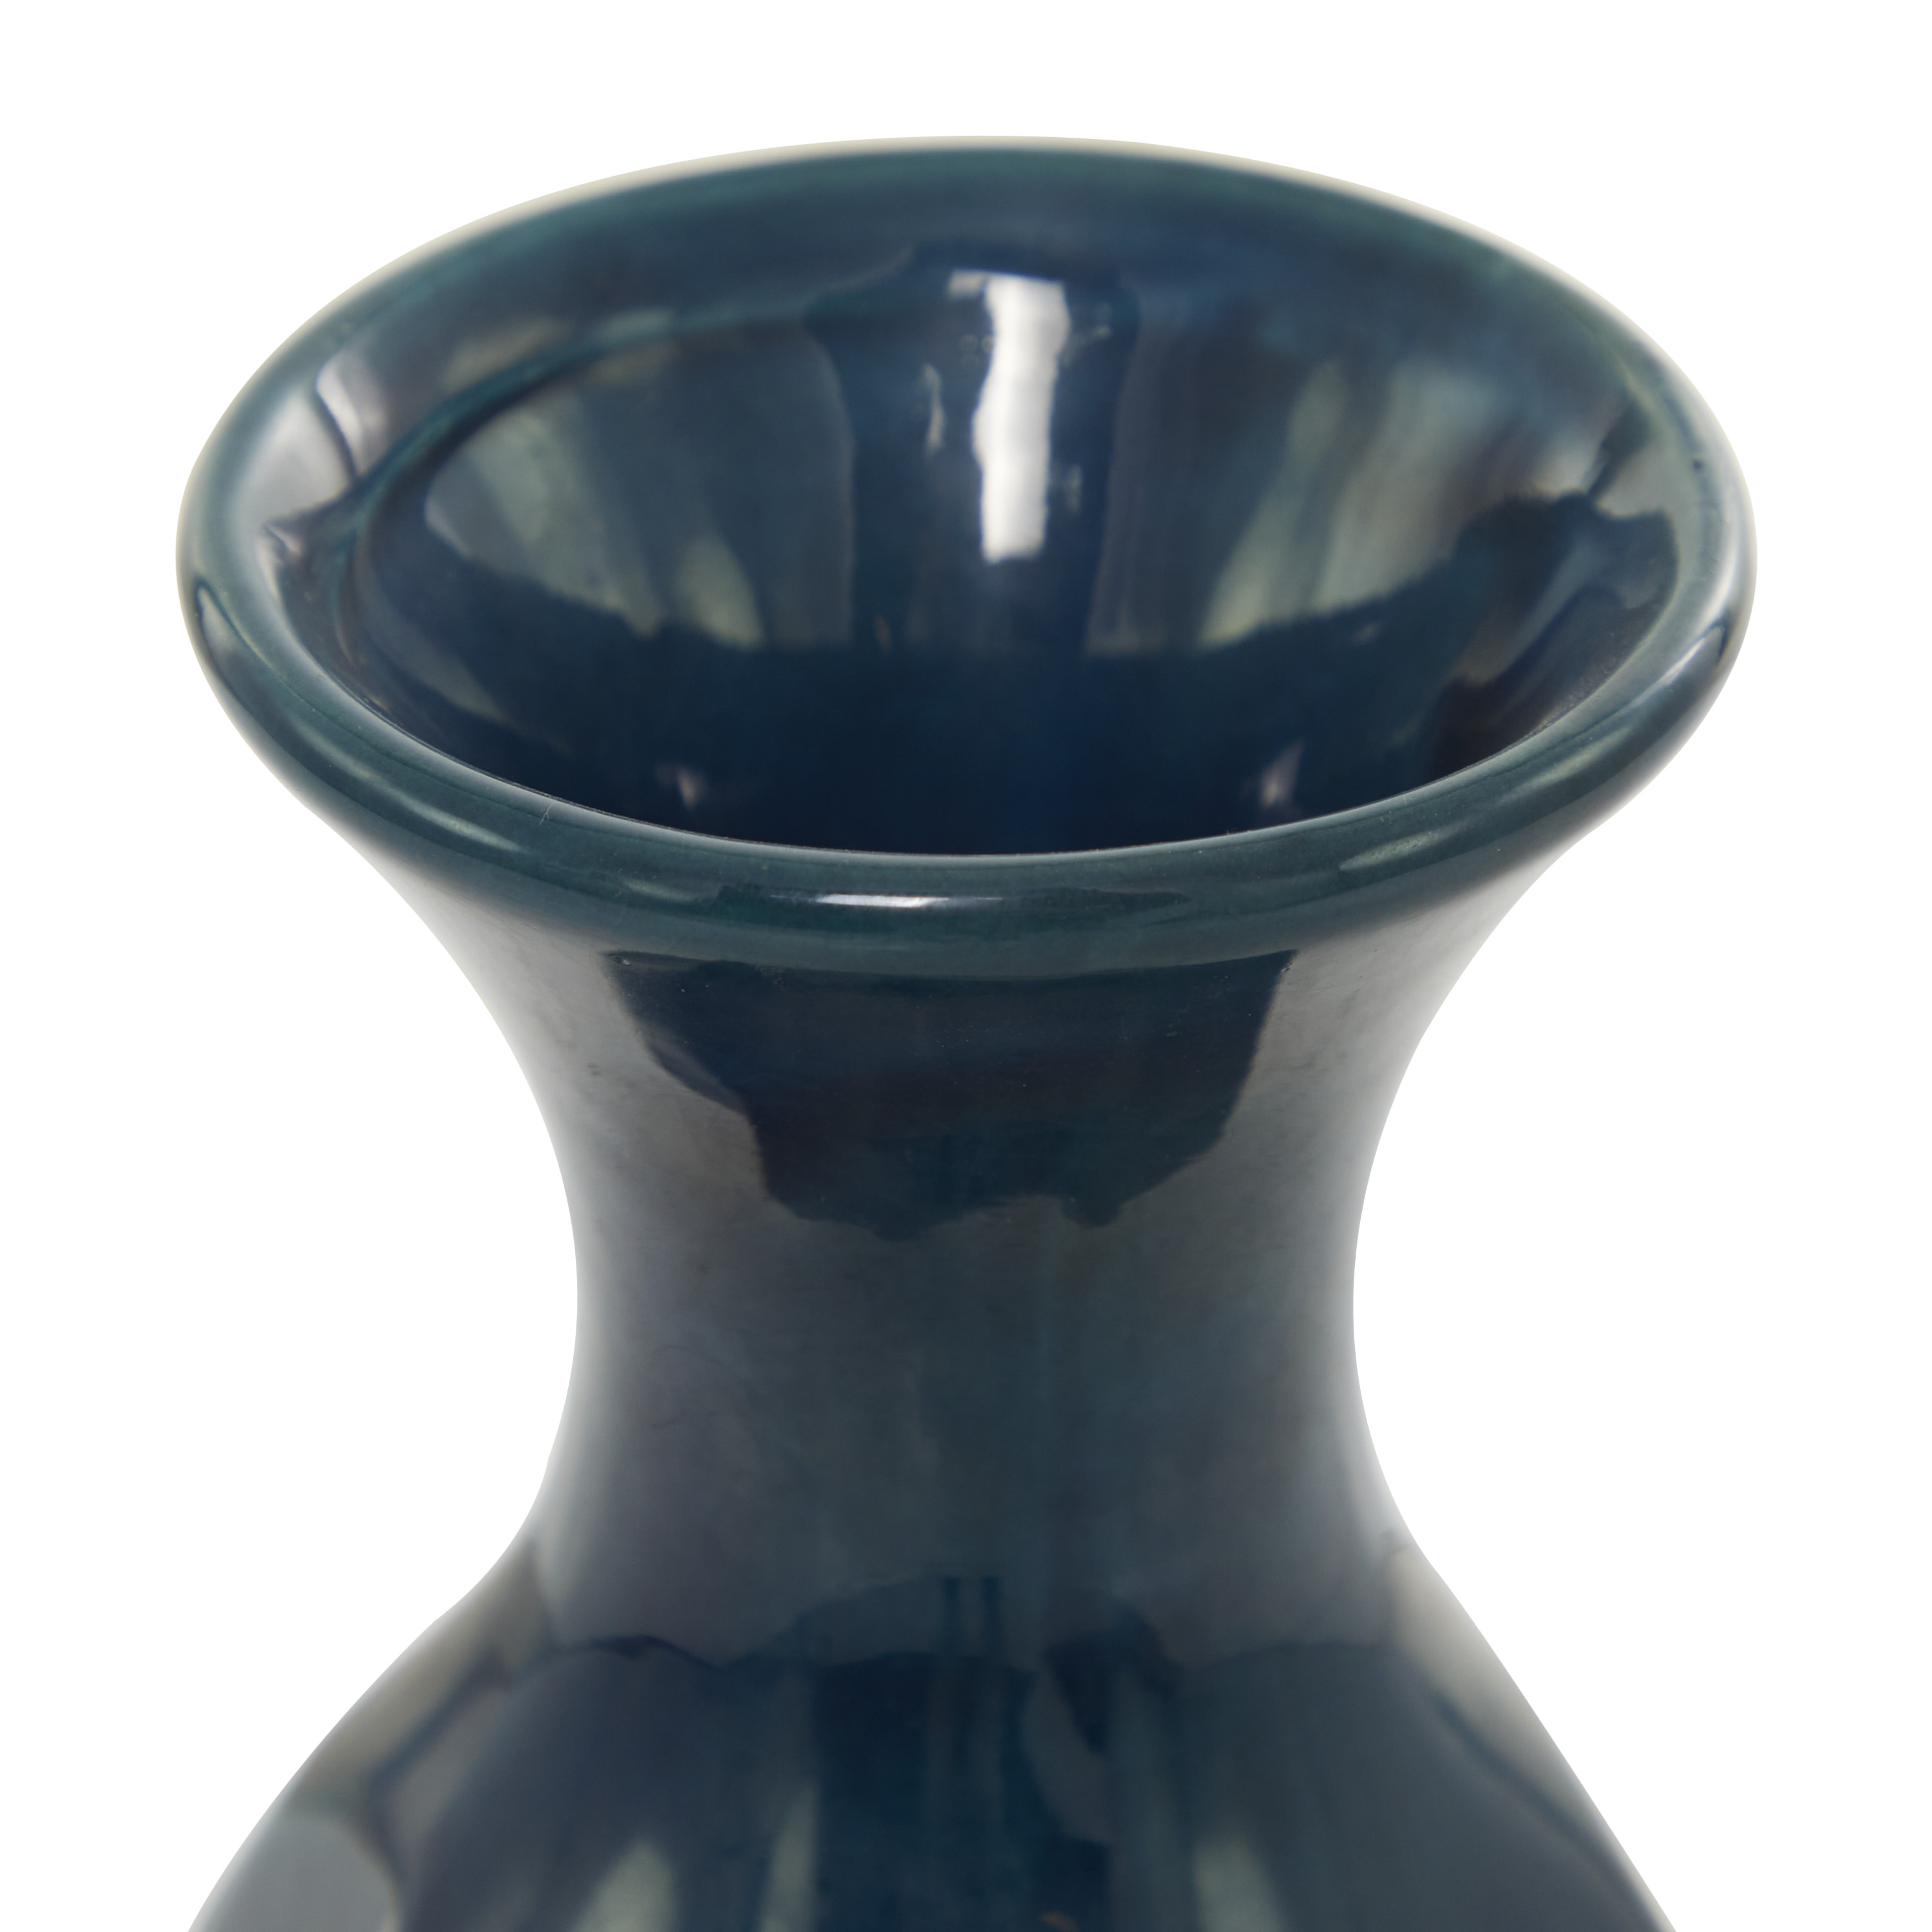 DecMode Blue Ceramic Modern and Coastal Vase 5"W x 15"H, featuring Minimalist Design with clean Lines and Angular Structures - image 5 of 12